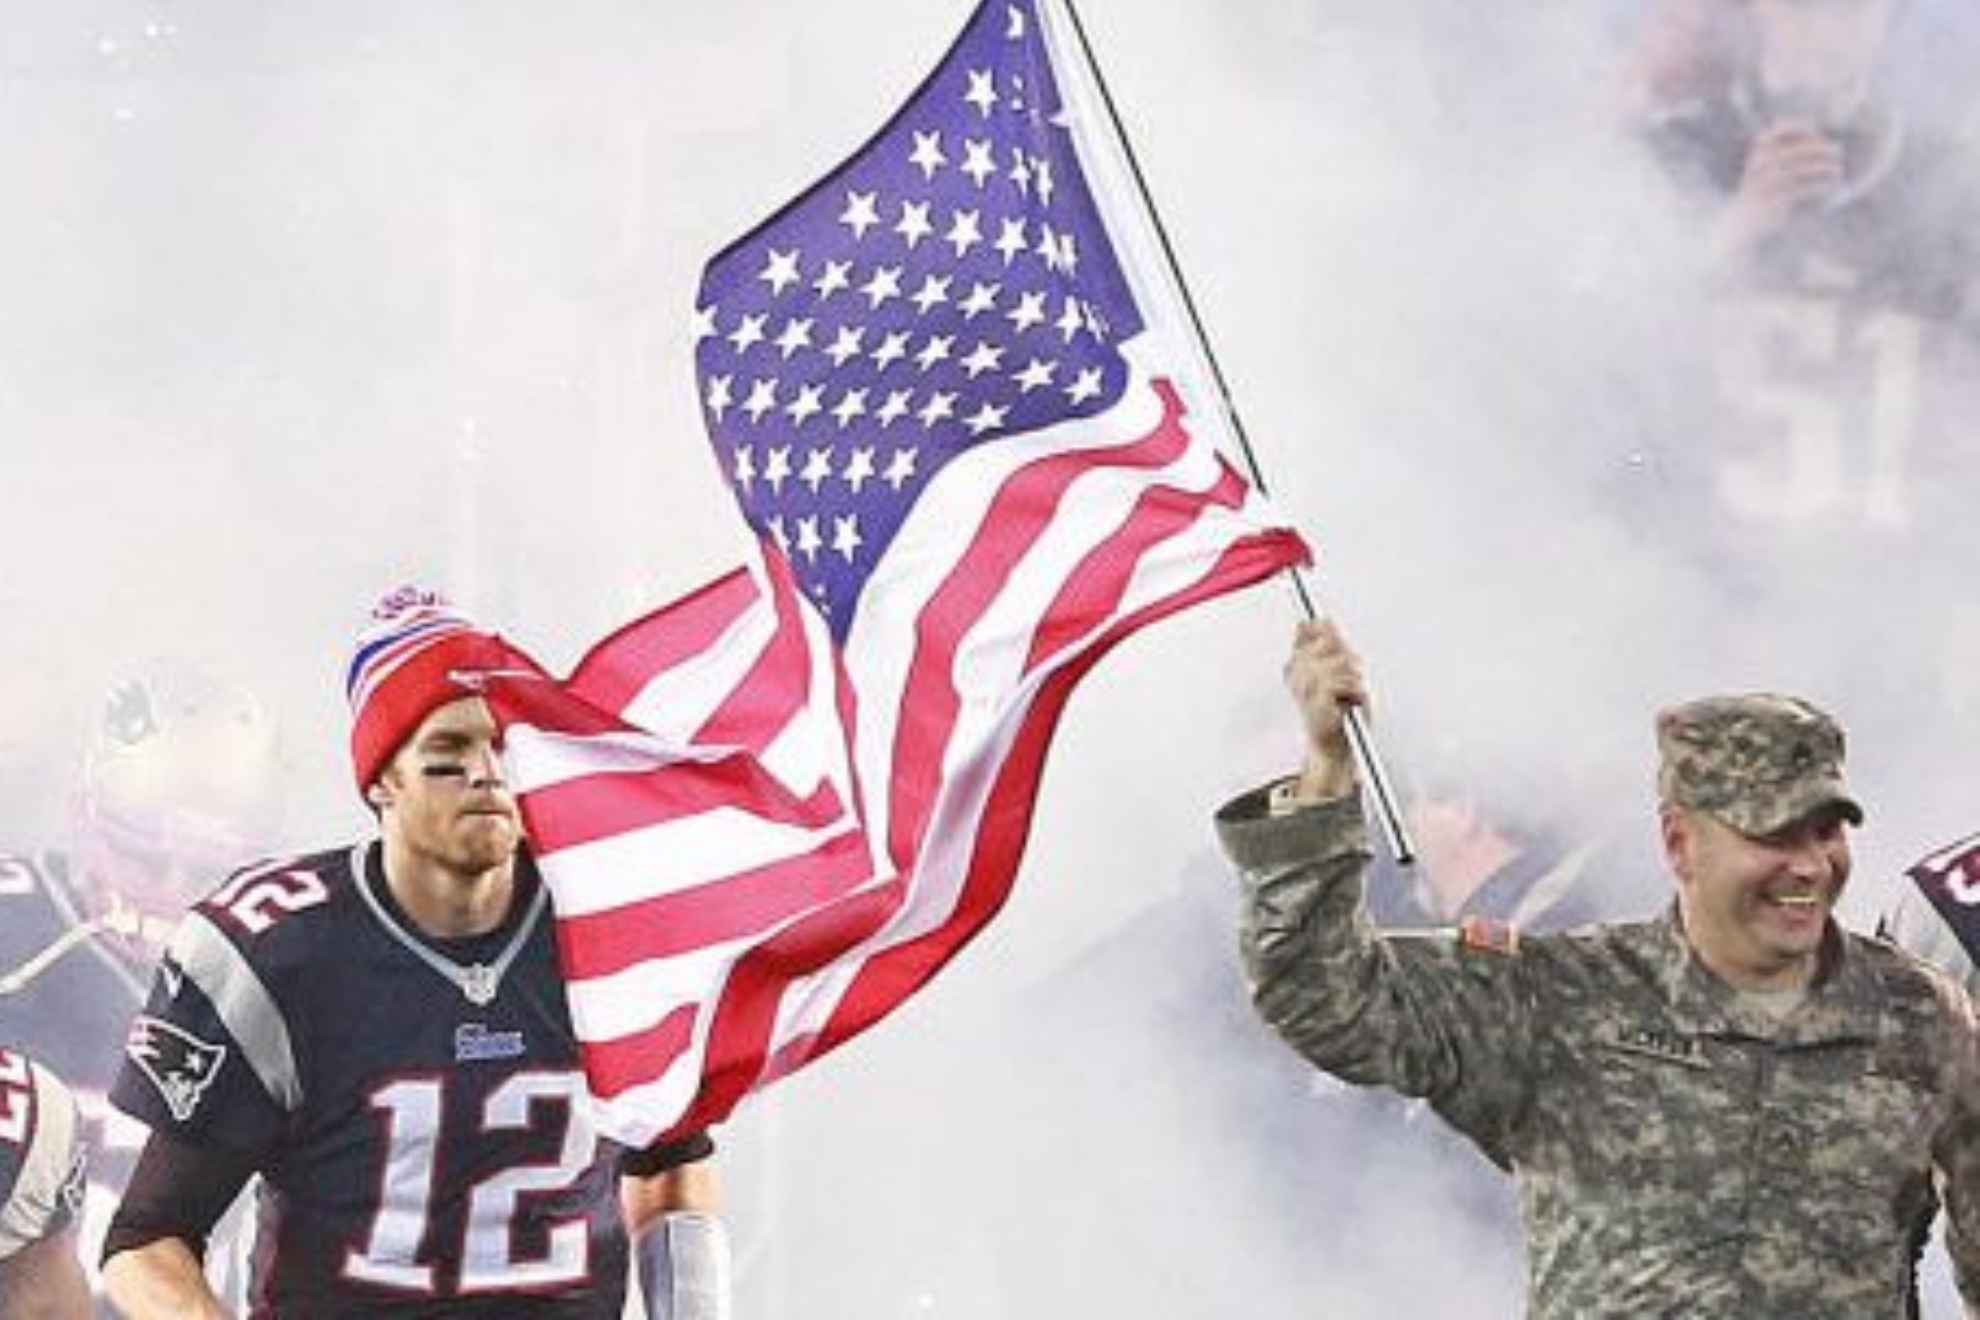 Tom Brady's Double Signed US Flag could be yours if you have at least $300K